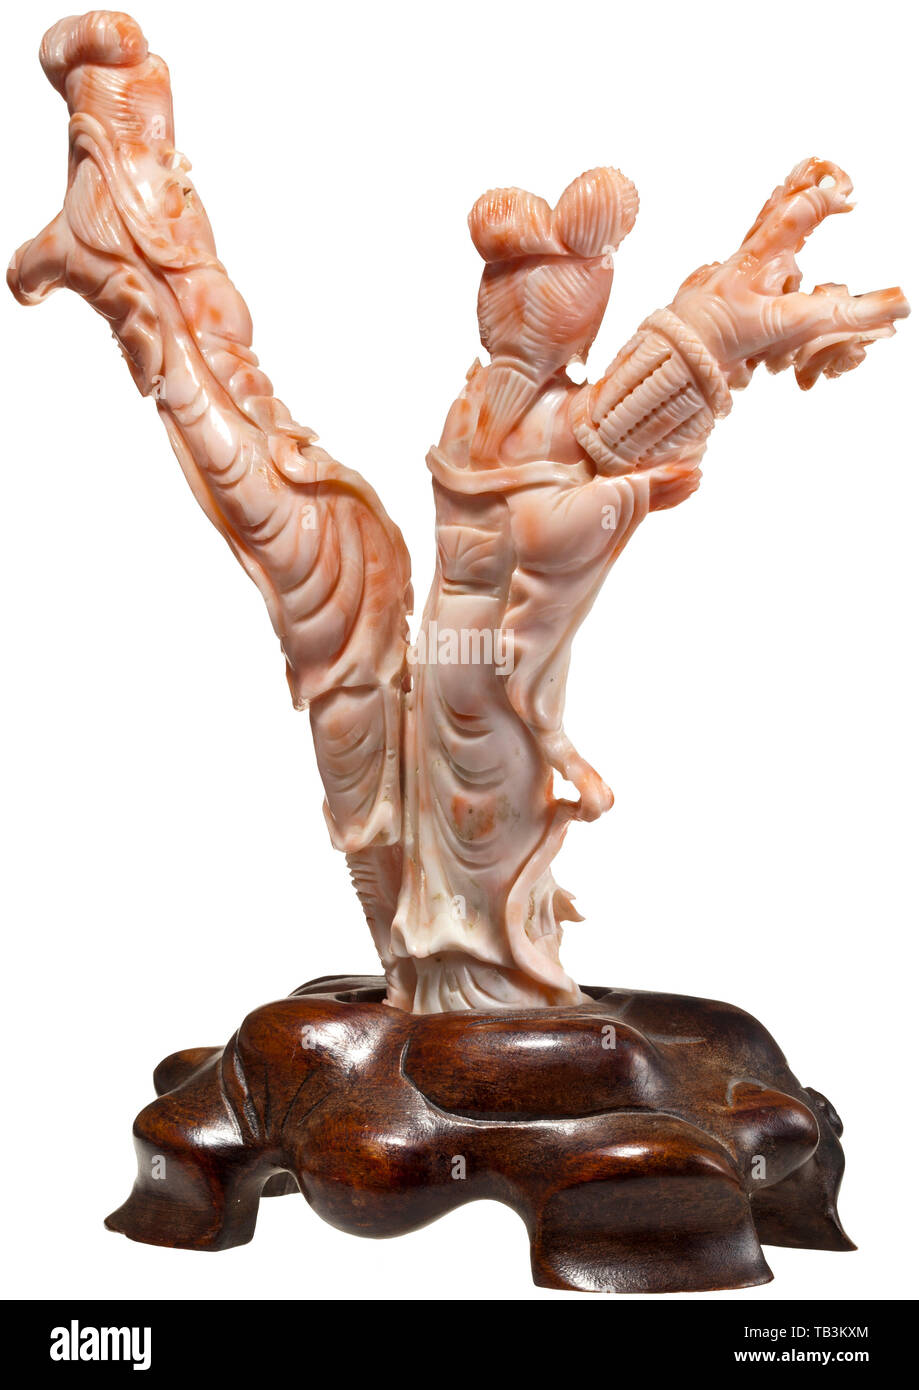 A Chinese carved coral branch, circa 1880, A carved pink coral branch, fully sculptured with the figures of two girls in long robes. Mounted on an openwork wooden base. Total height 16 cm. China, Chinese, historic, historical 19th century, Additional-Rights-Clearance-Info-Not-Available Stock Photo